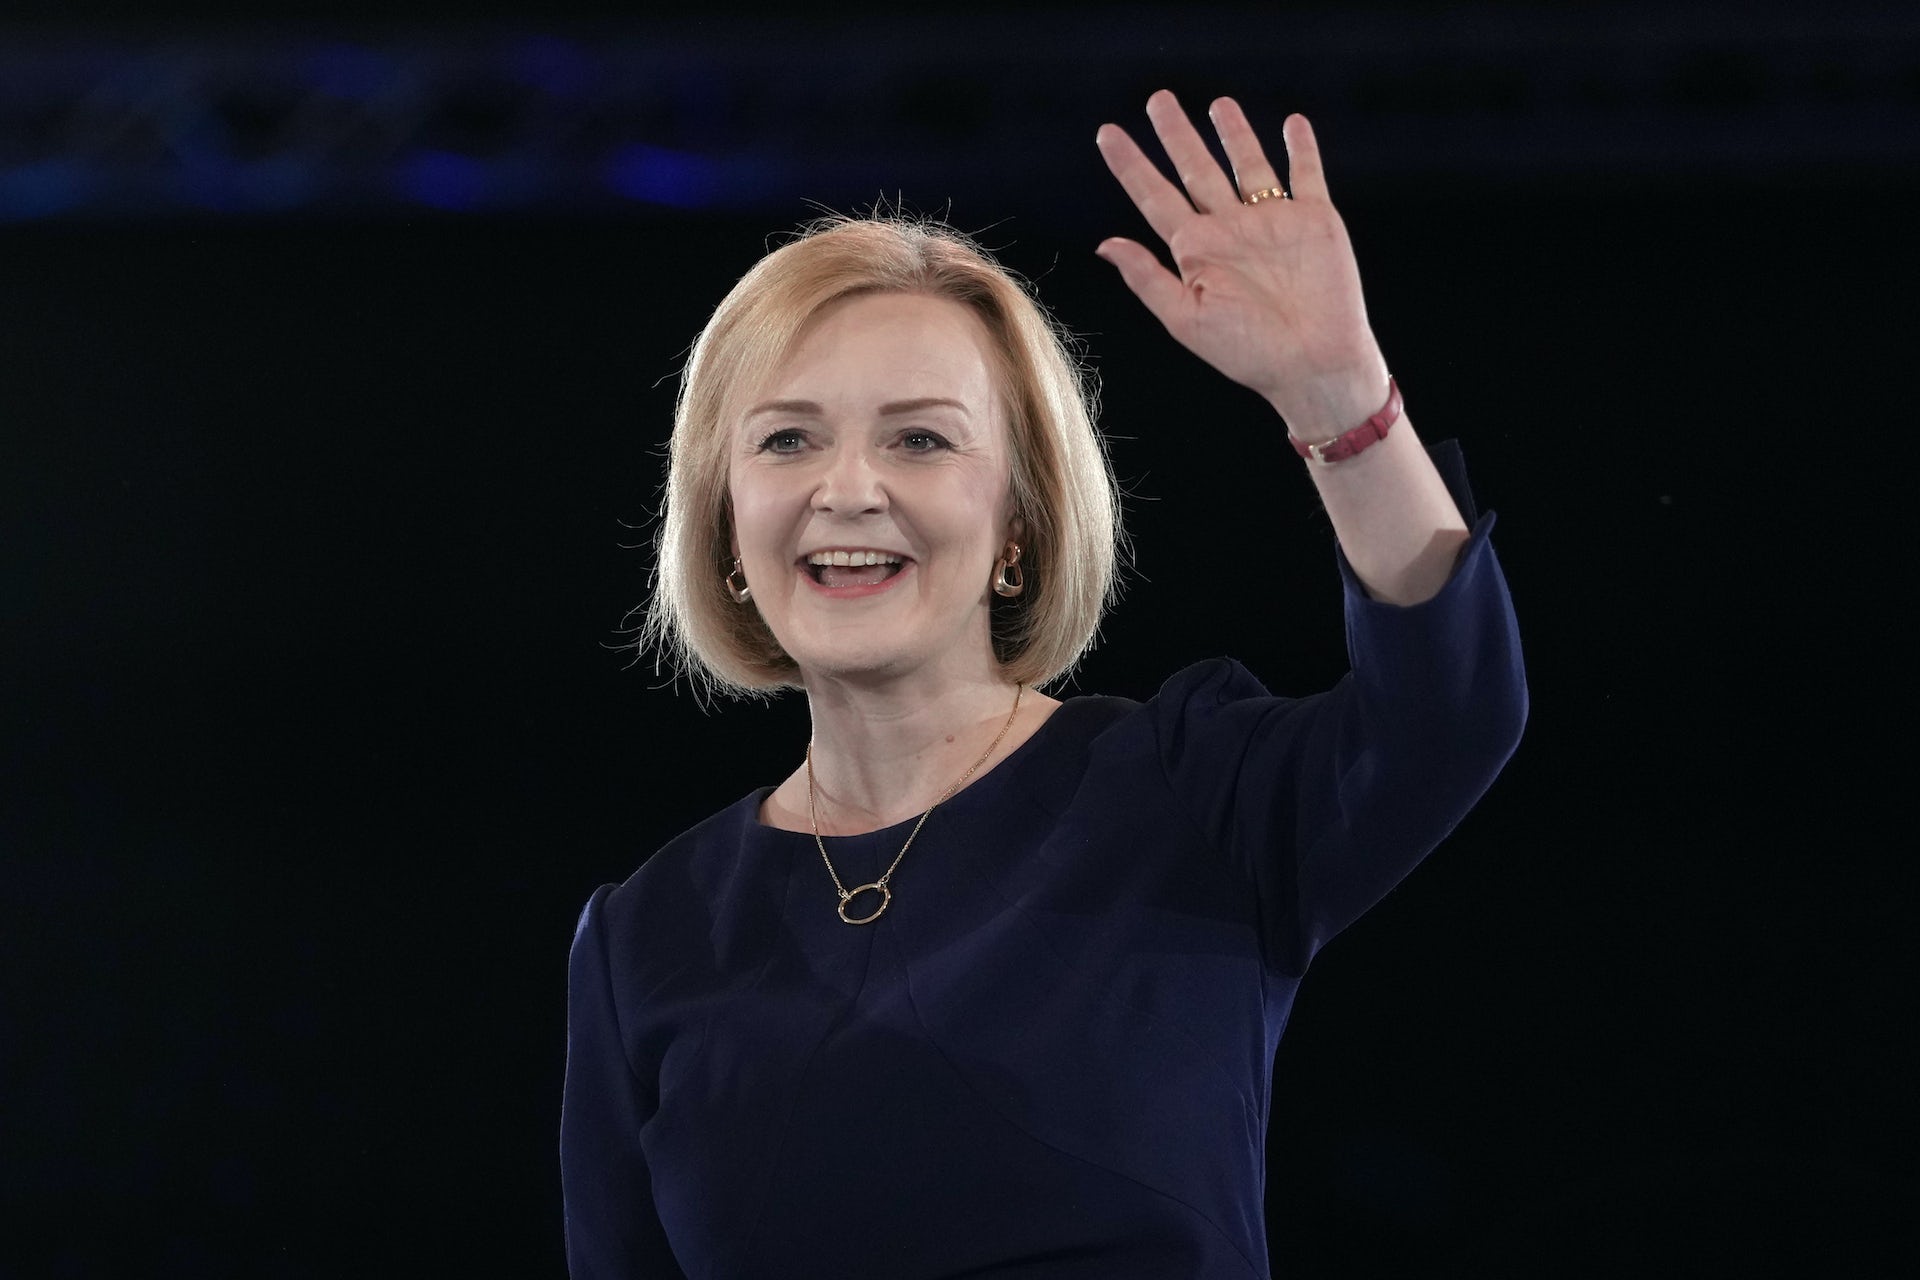 Liz Truss to take over as UK’s next Prime Minister - Asiana Times